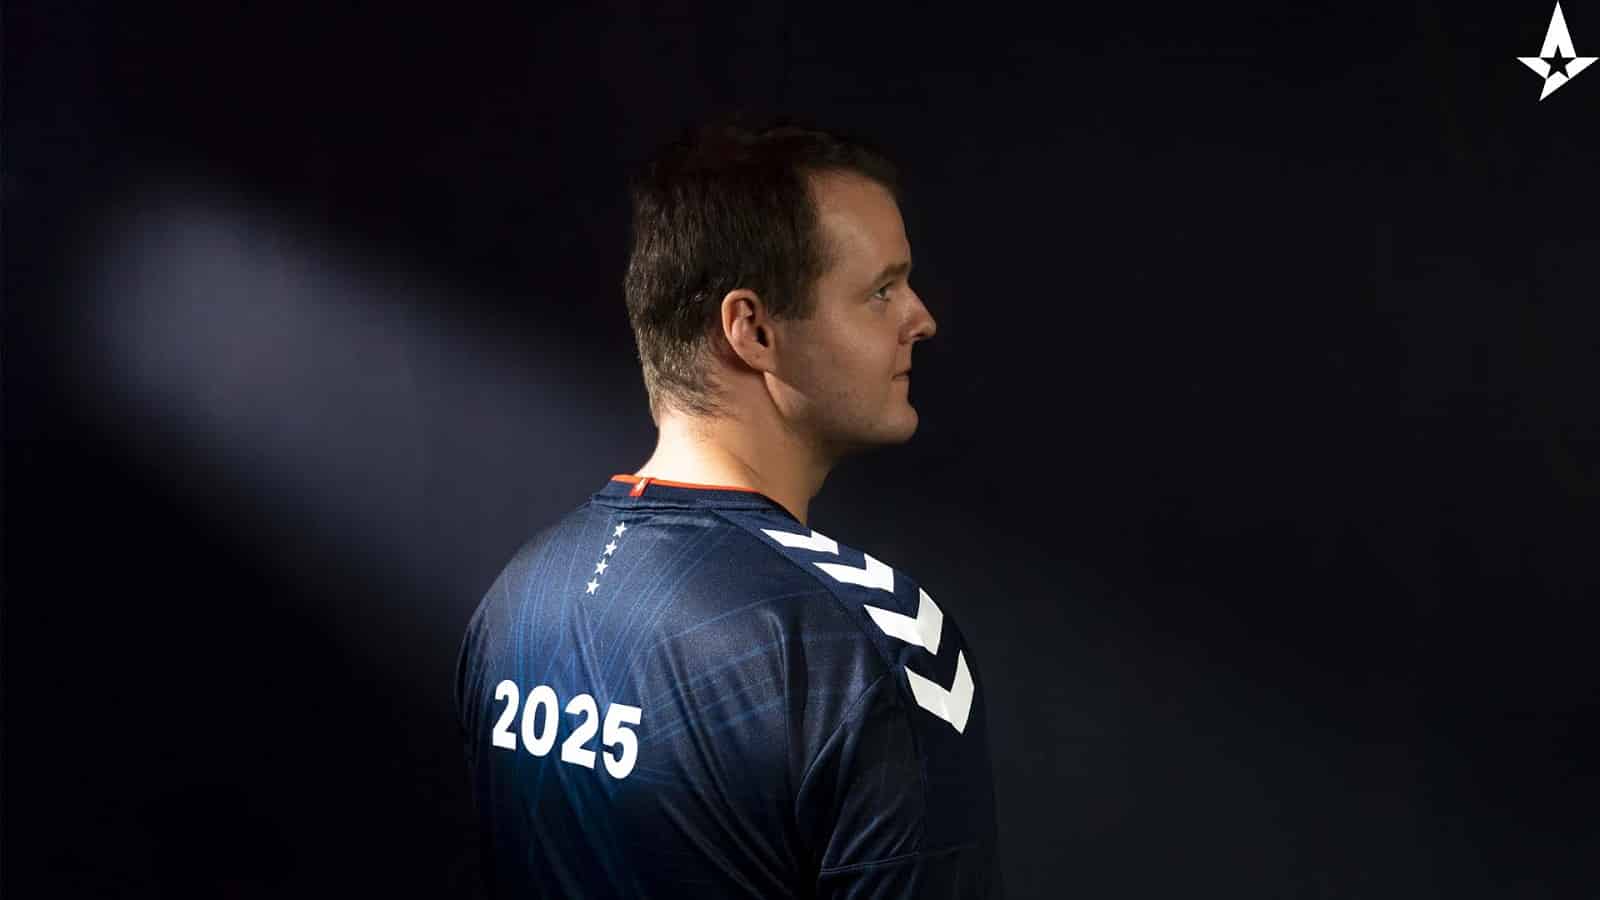 Xyp9x extends his Astralis contract until 2025